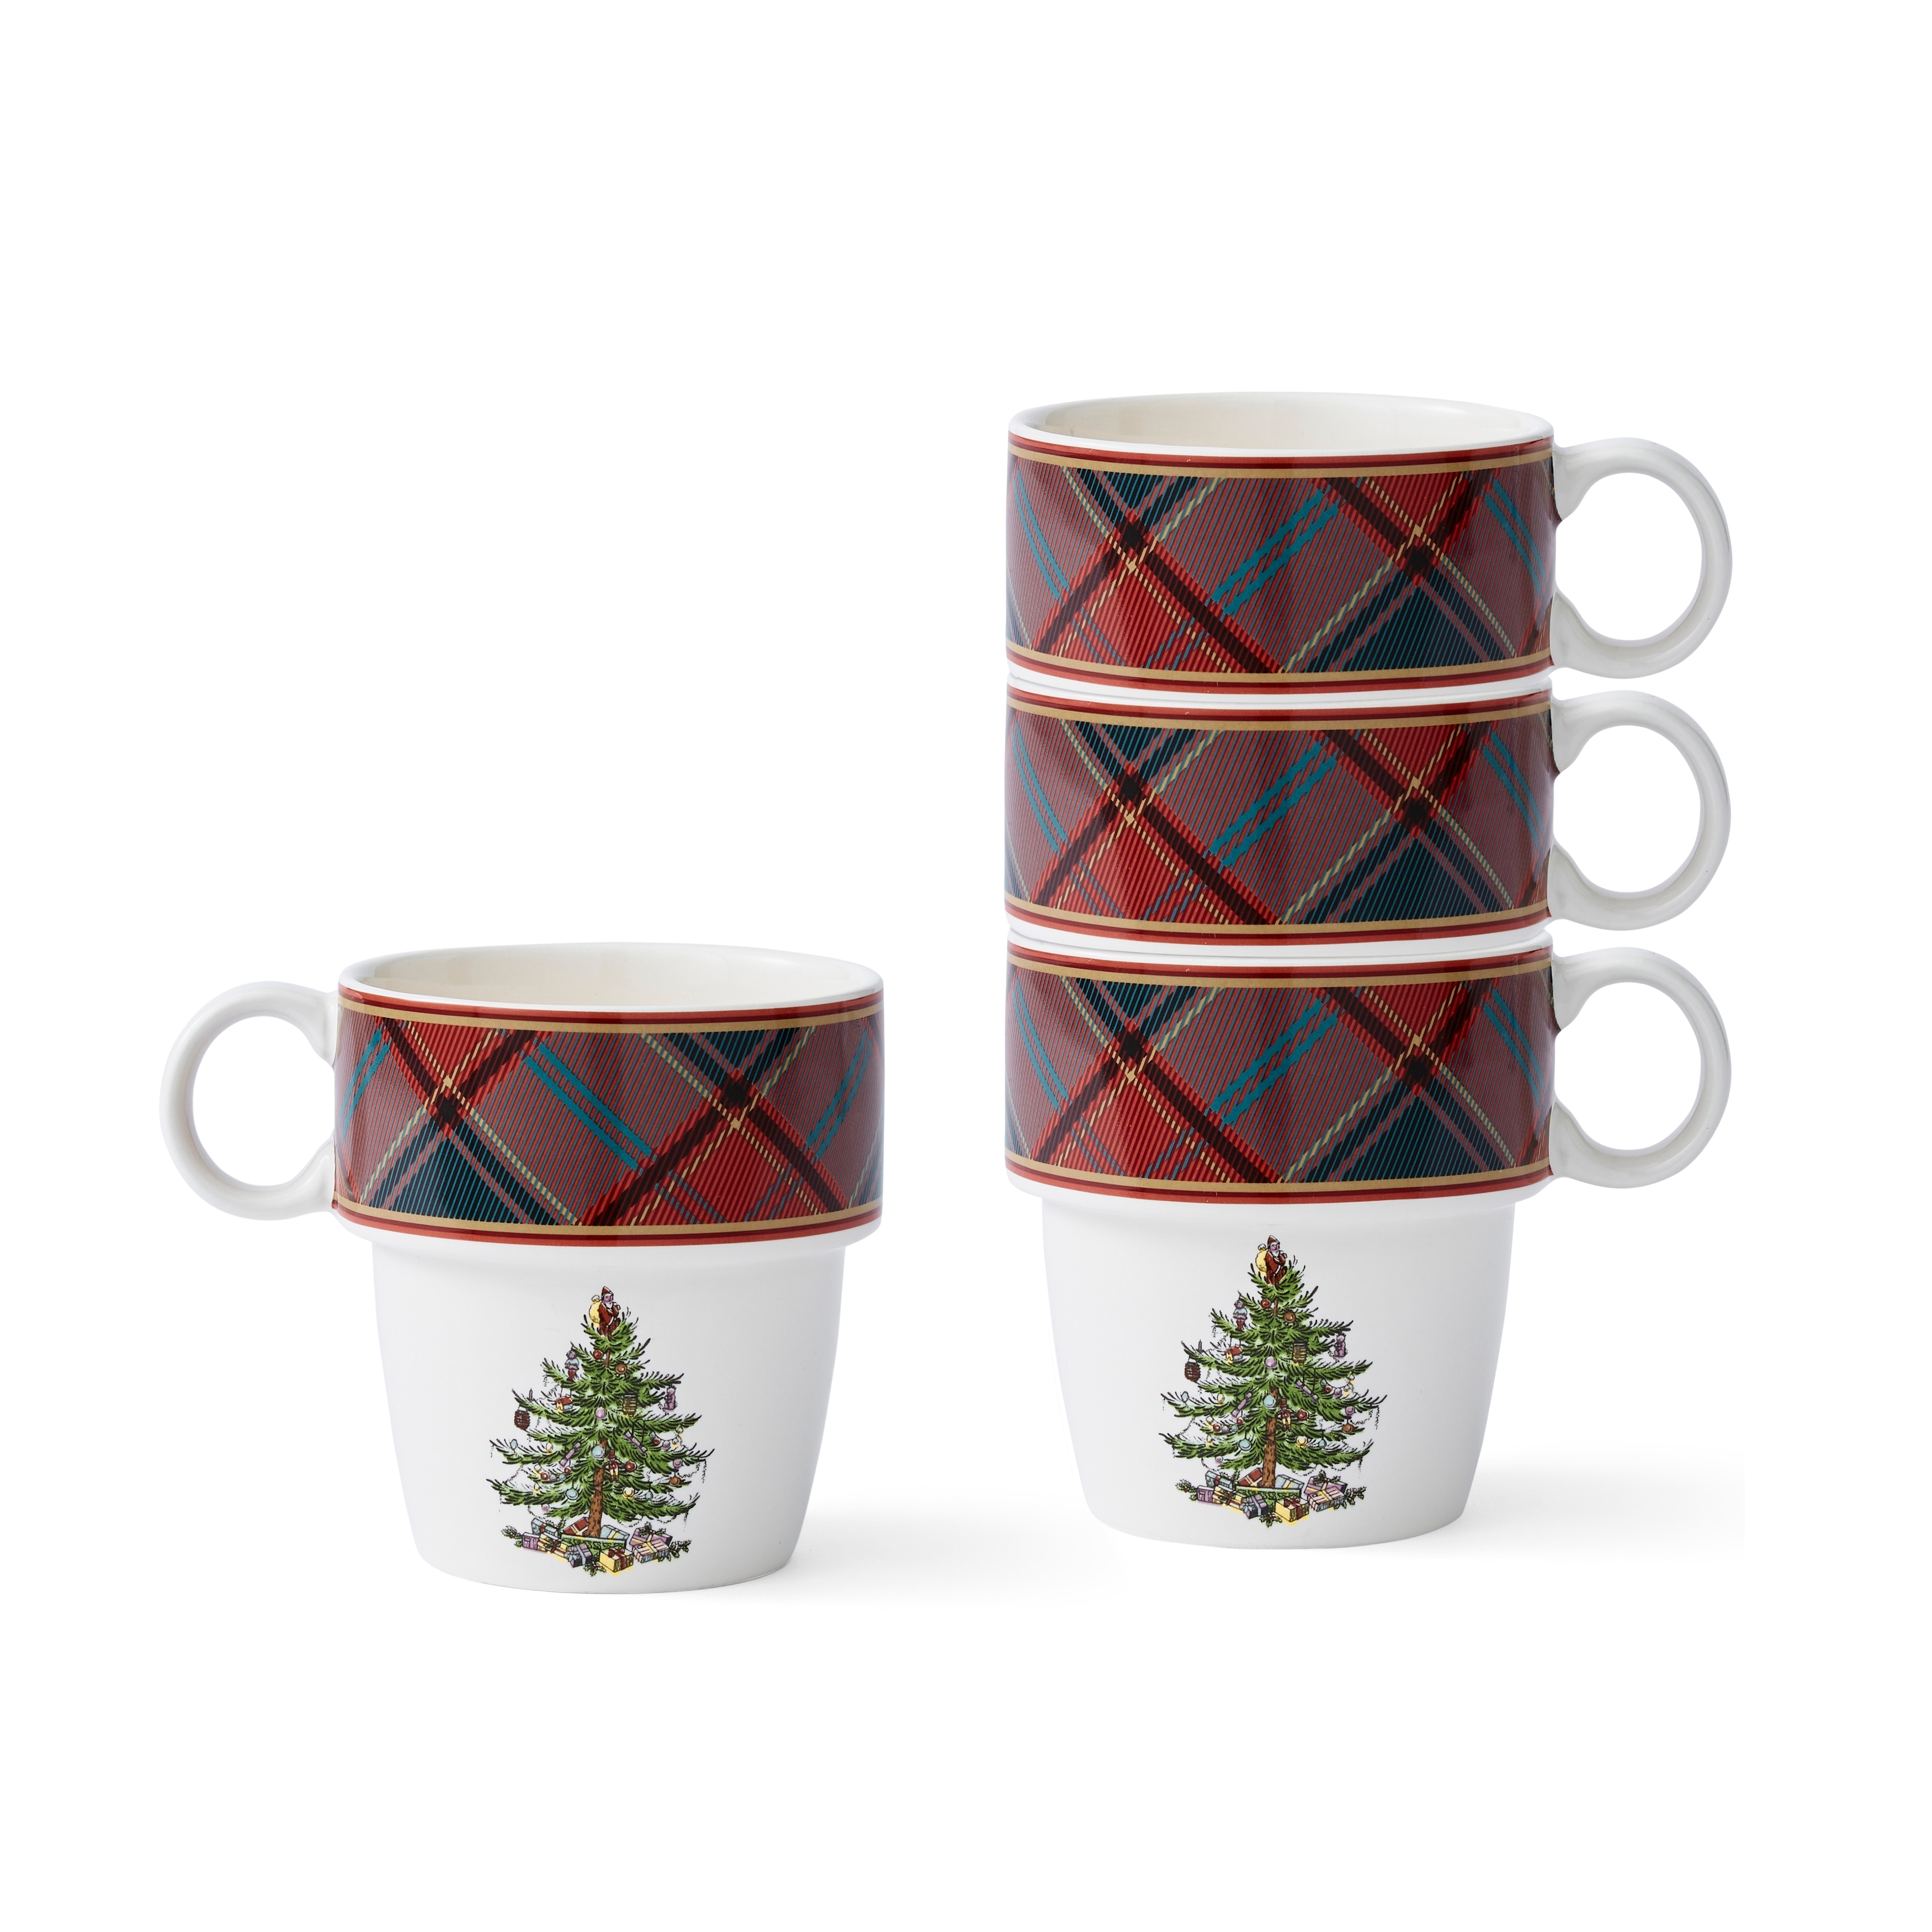 https://ak1.ostkcdn.com/images/products/is/images/direct/df1ff6af07c984e6bab21da0ef41ee88c43ecb9a/Spode-Christmas-Tree-Tartan-Stacking-Mugs-Set-of-4.jpg